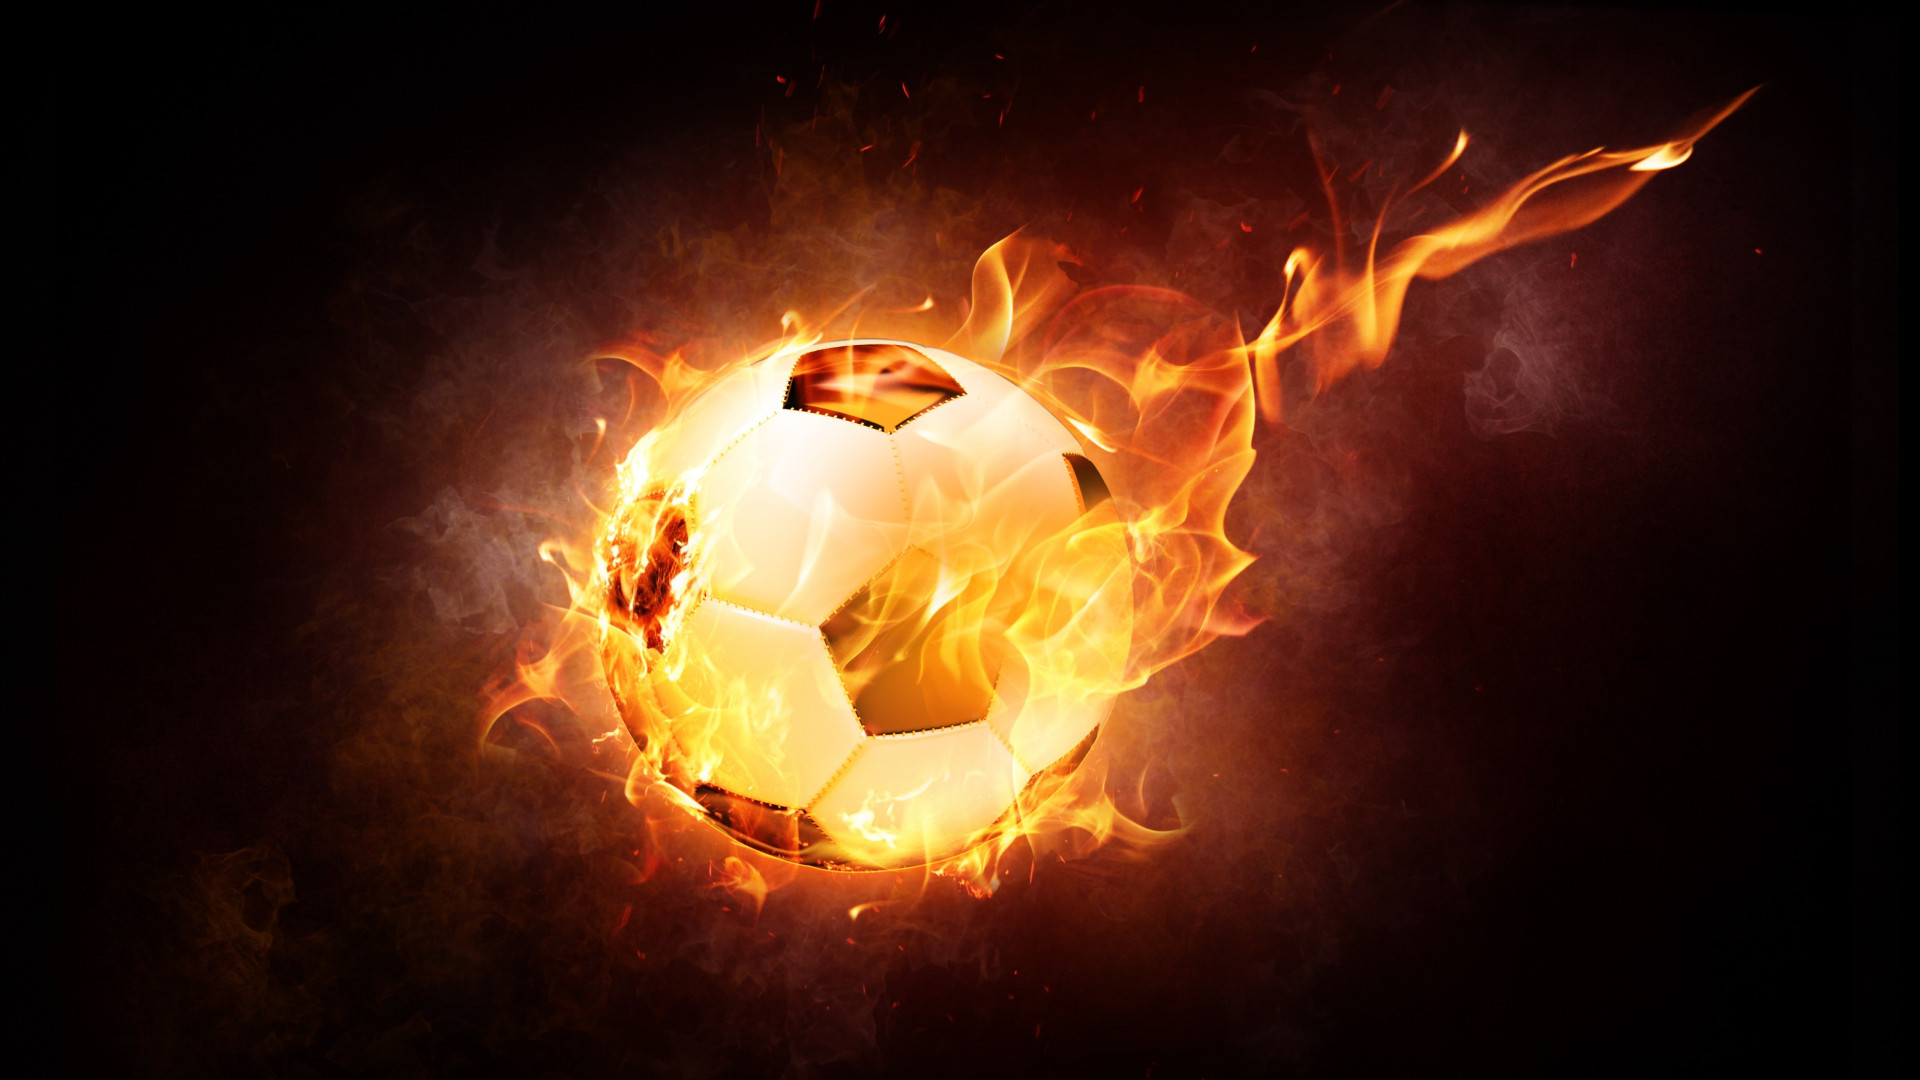 The football ball is on fire wallpaper 1920x1080